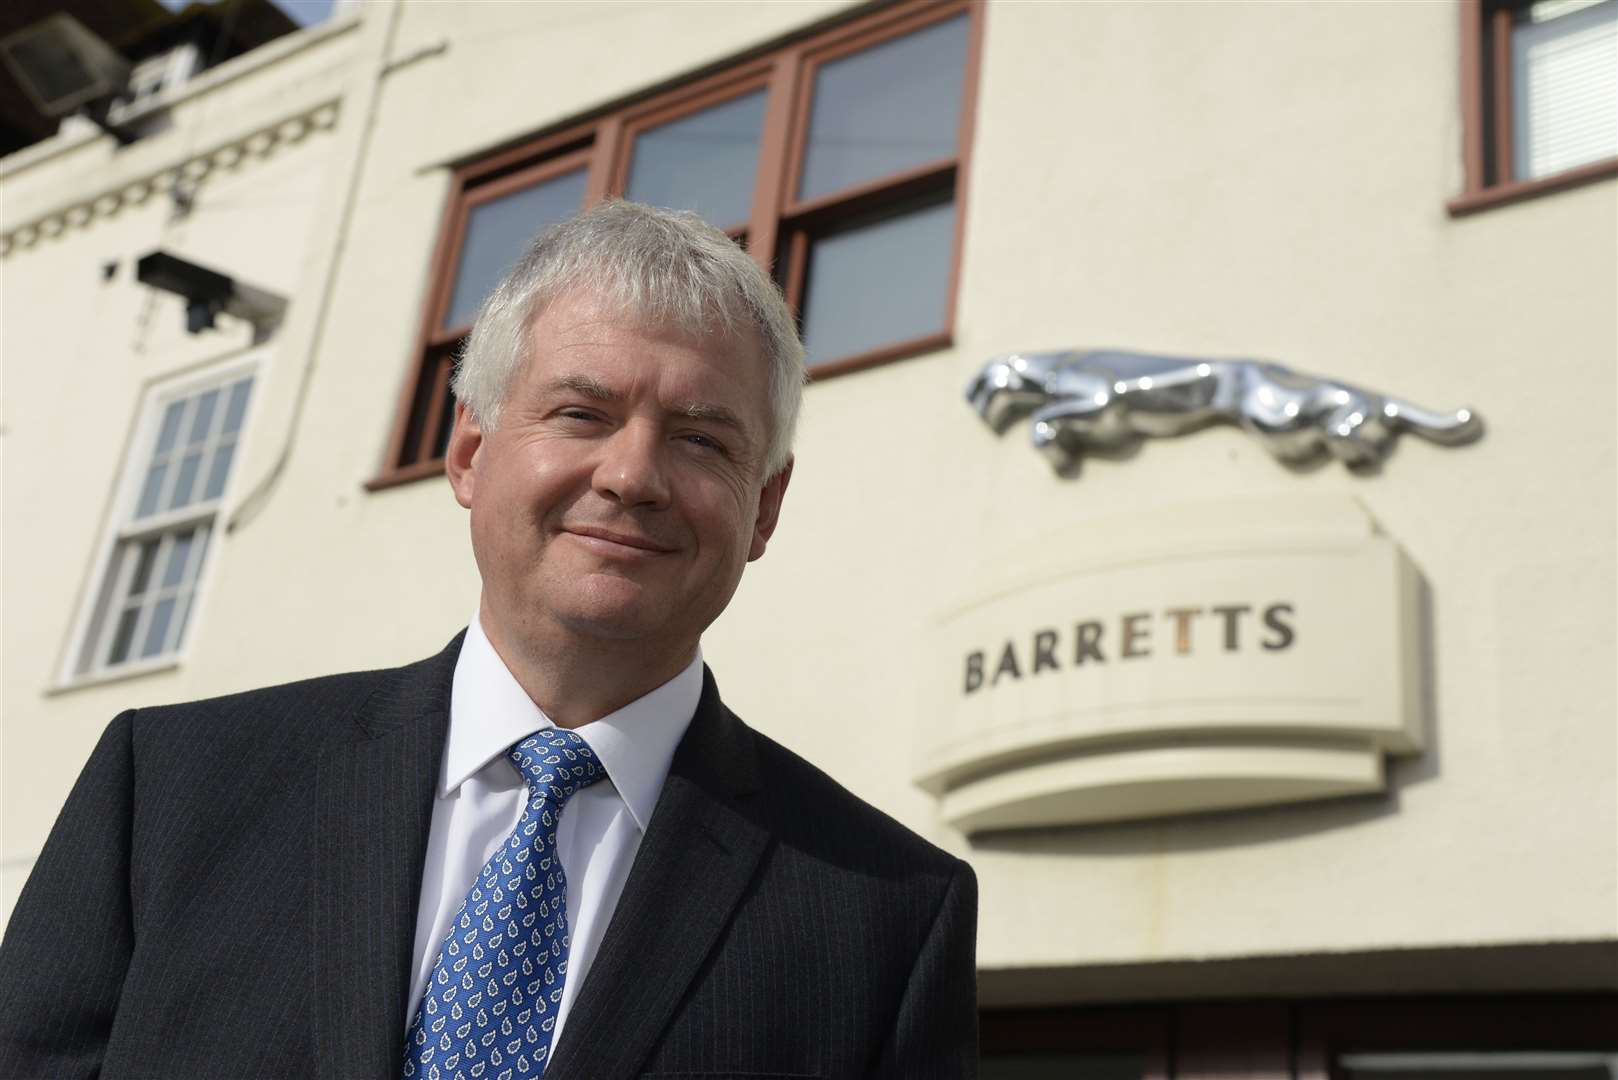 Paul Barrett, managing director of Barretts, believed the headlights could be used for cannabis production.